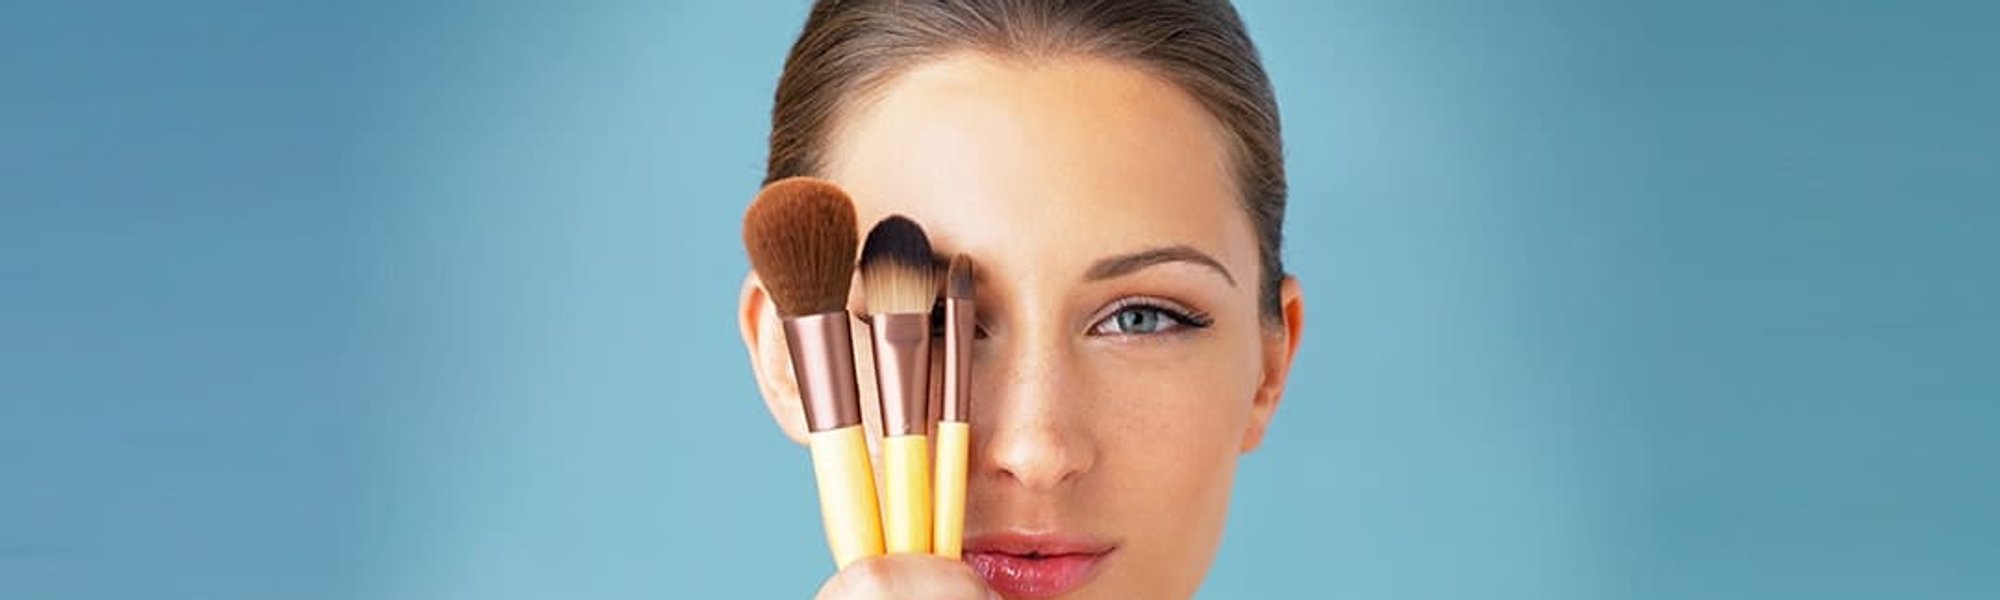 Makeup Brushes And How To Use Them 1080x476